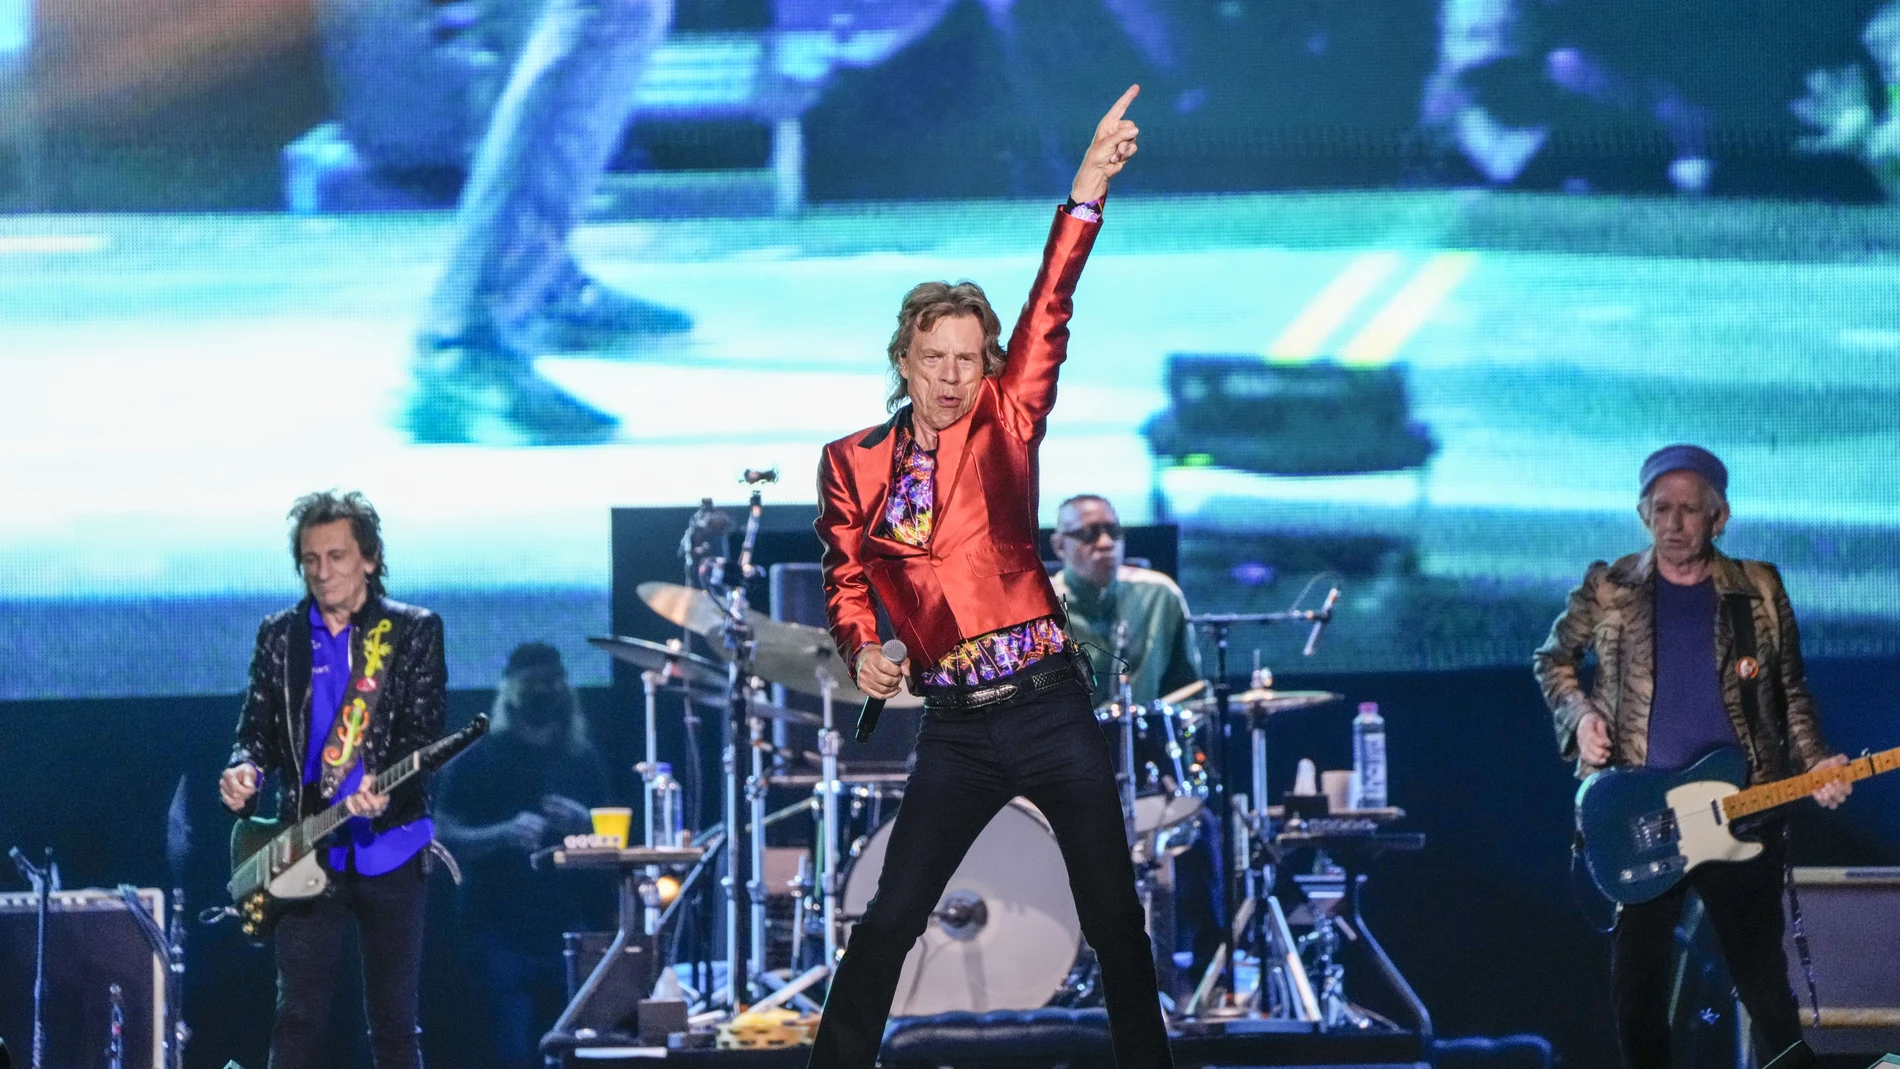 Mick Jagger, centre, Ronnie Wood, left, and Keith Richards, right, of the band the Rolling Stones, perform during their Sixty Stones Europe 2022 tour at the Wanda Metropolitano stadium in Madrid, Spain, Wednesday, June 1, 2022. (AP Photo/Manu Fernandez)